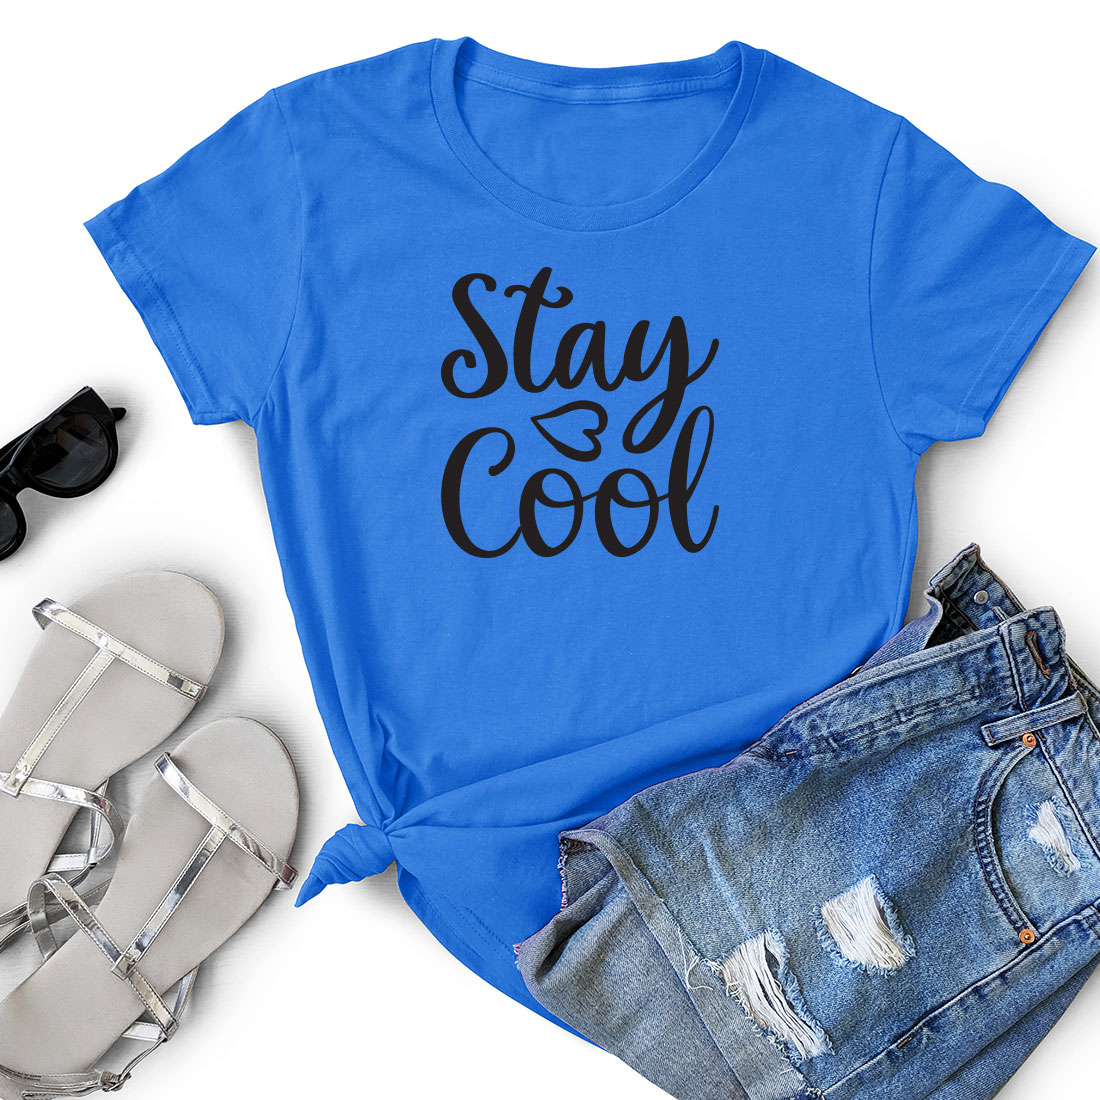 T - shirt that says stay cool next to a pair of shorts.